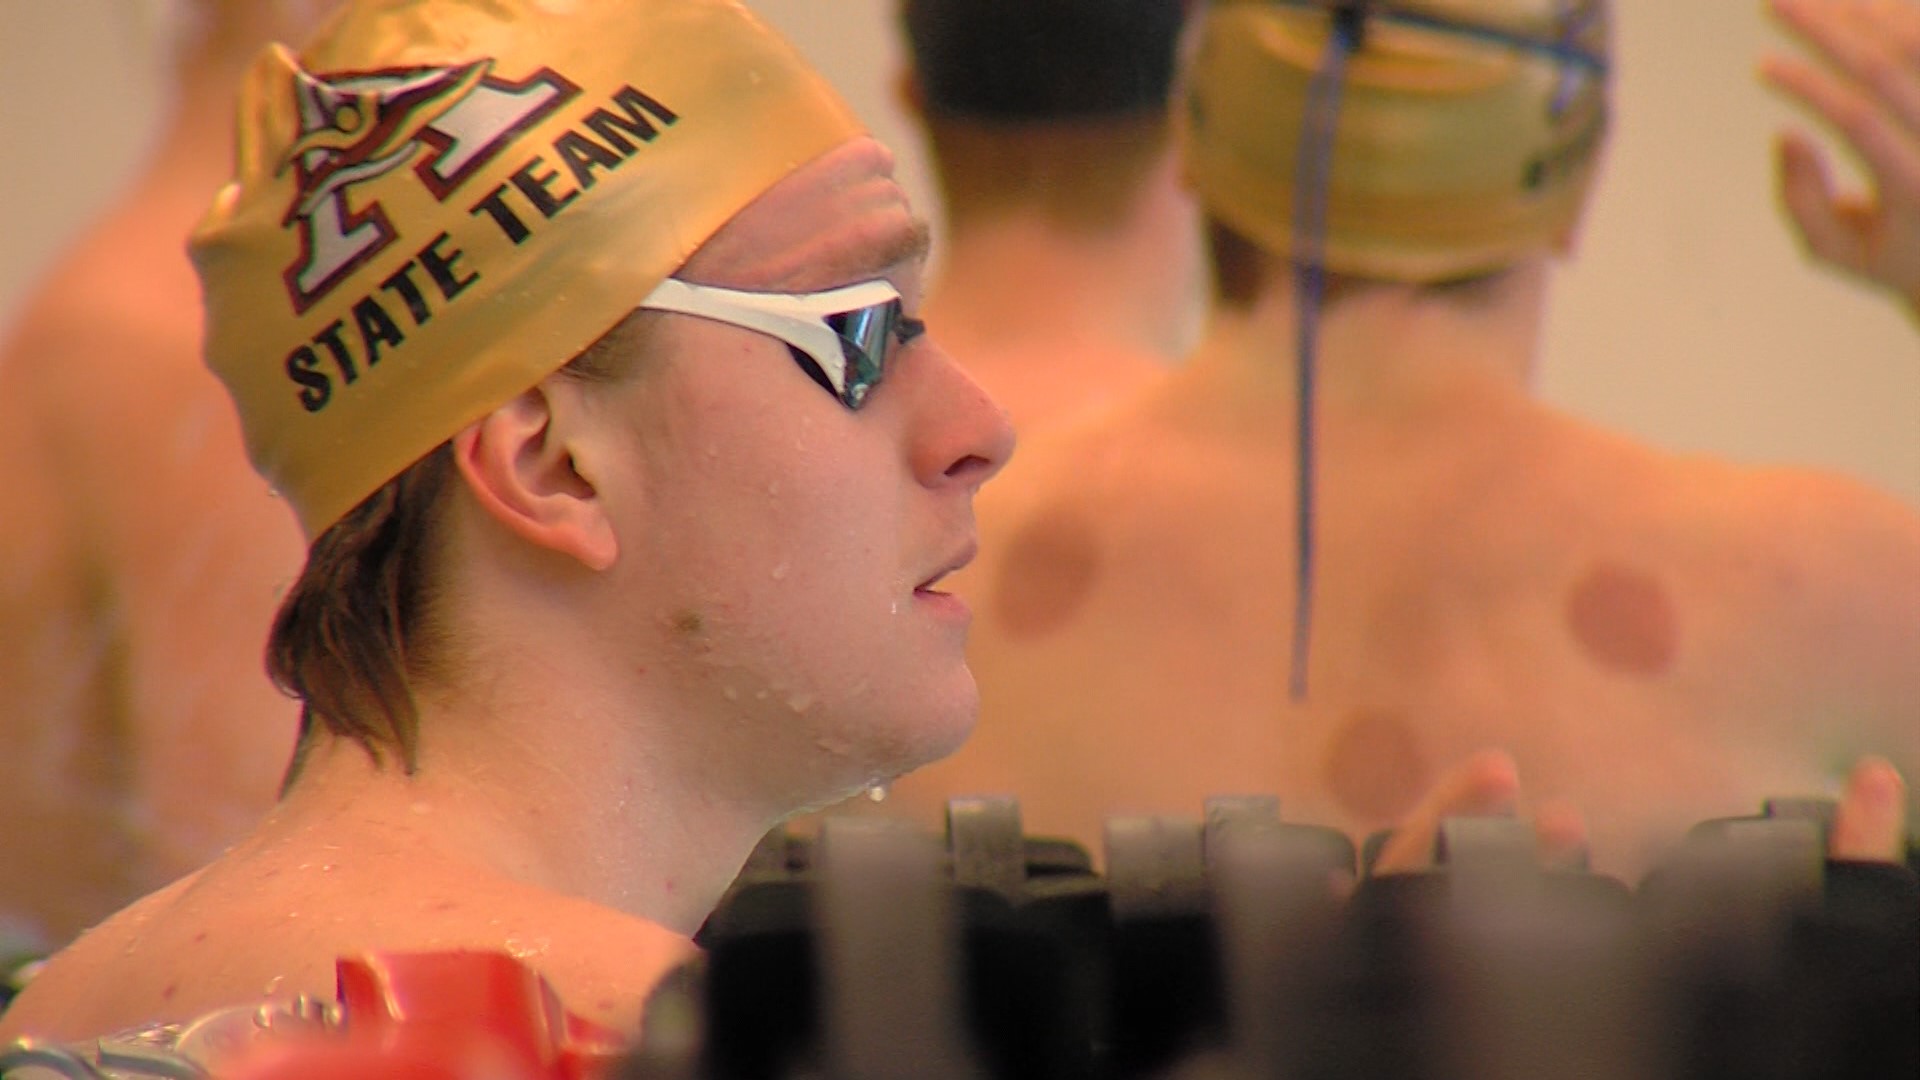 Trent Frandson has set numerous records at Ankeny and in the State, but he has one more goal to reach Saturday at the state swim meet